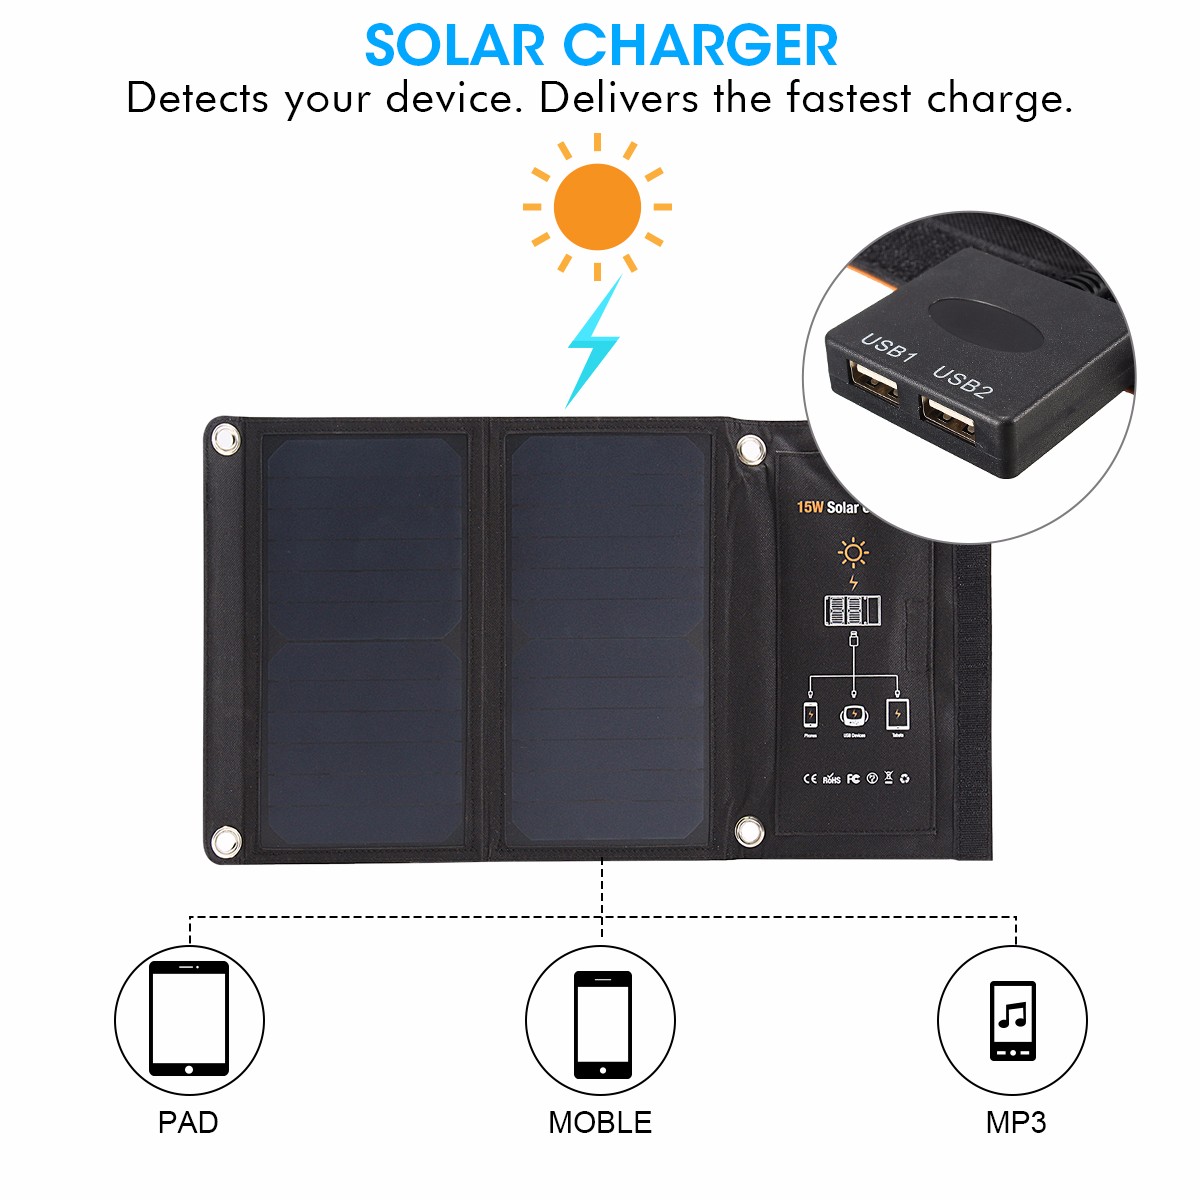 MOHOO-15w-25A-2-Port-Solar-Charger-SLS-15-Comes-with-2-Carabiner--Multifunctional-Charging-Cable-1939276-1